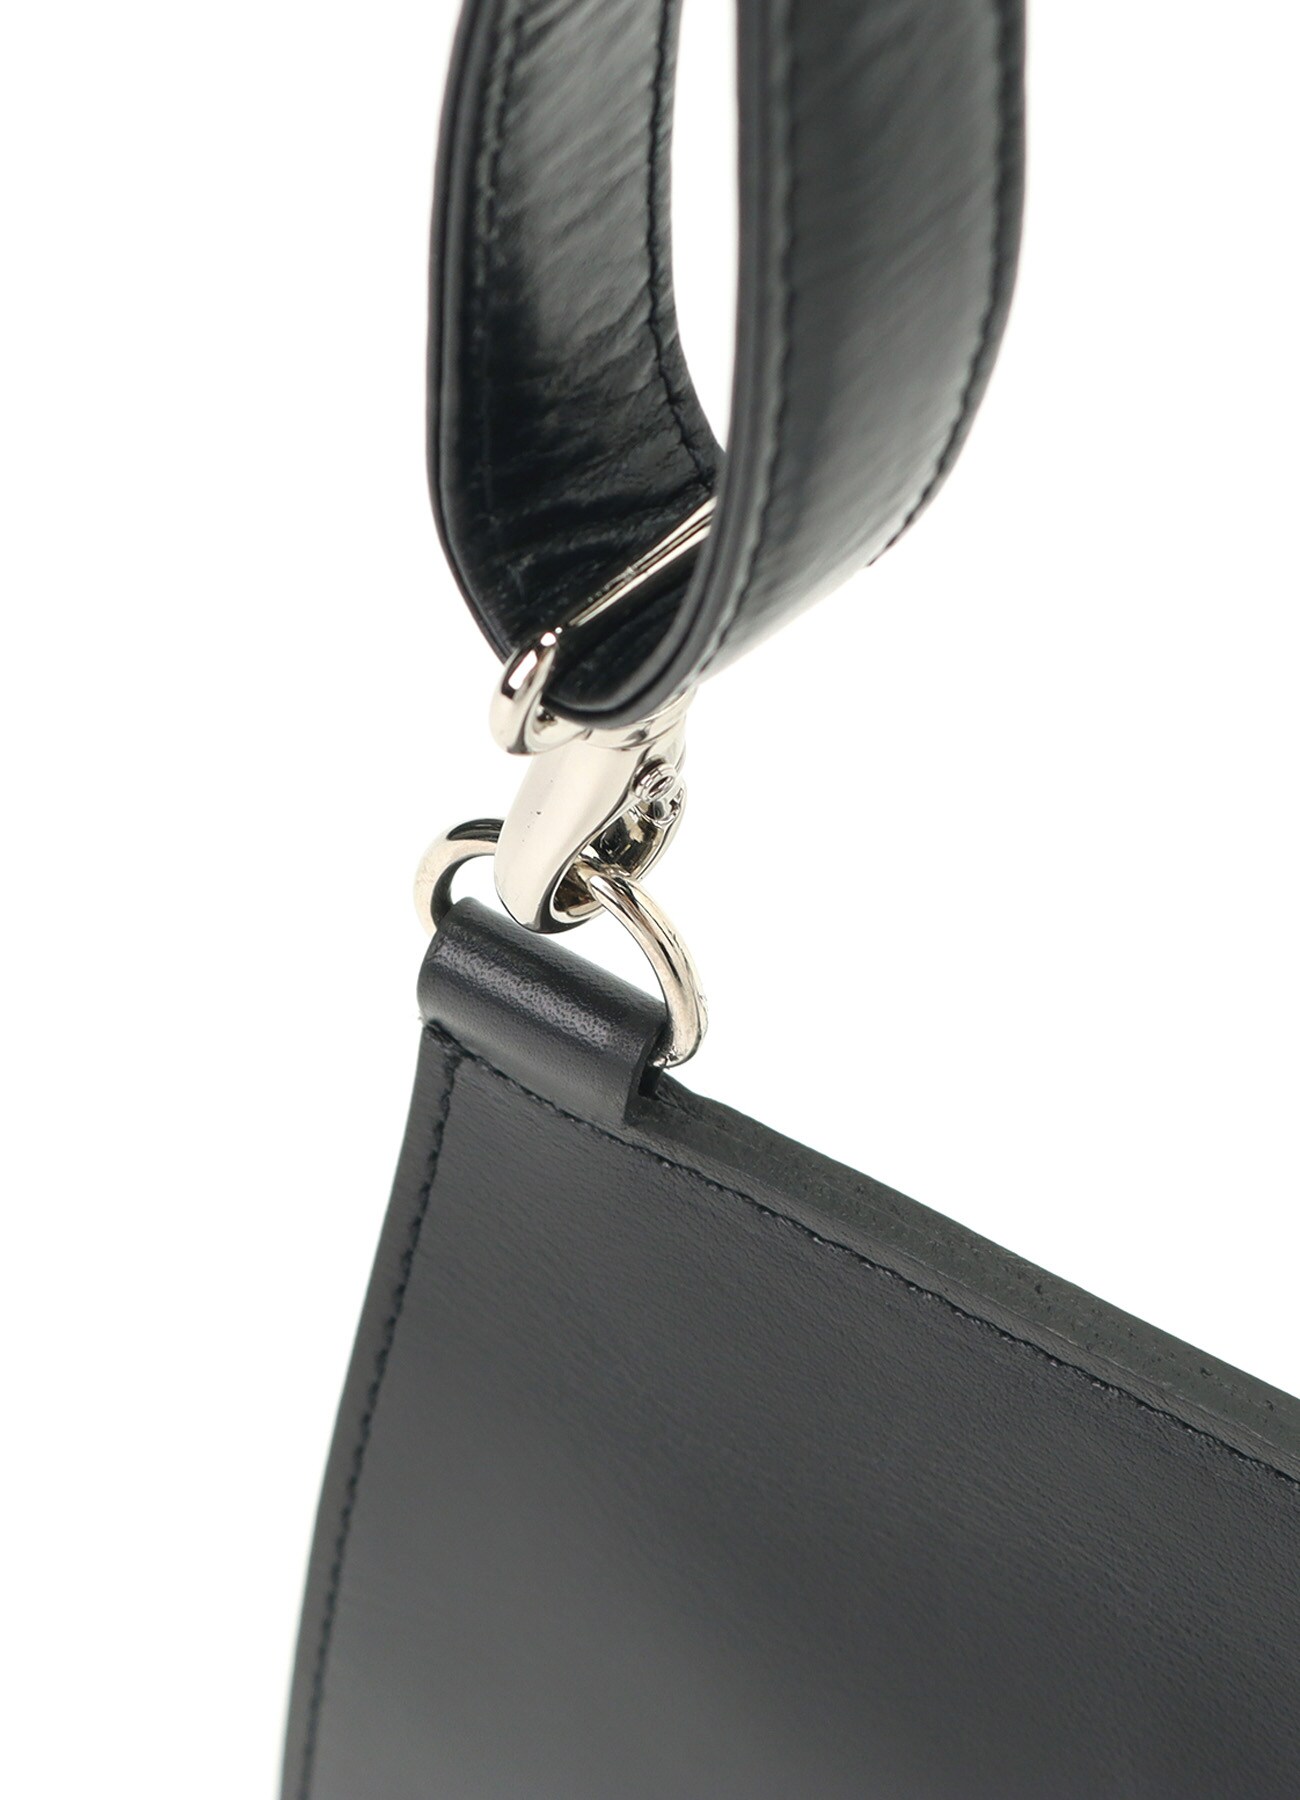 LEATHER PHONE HOLDER WITH STRAP